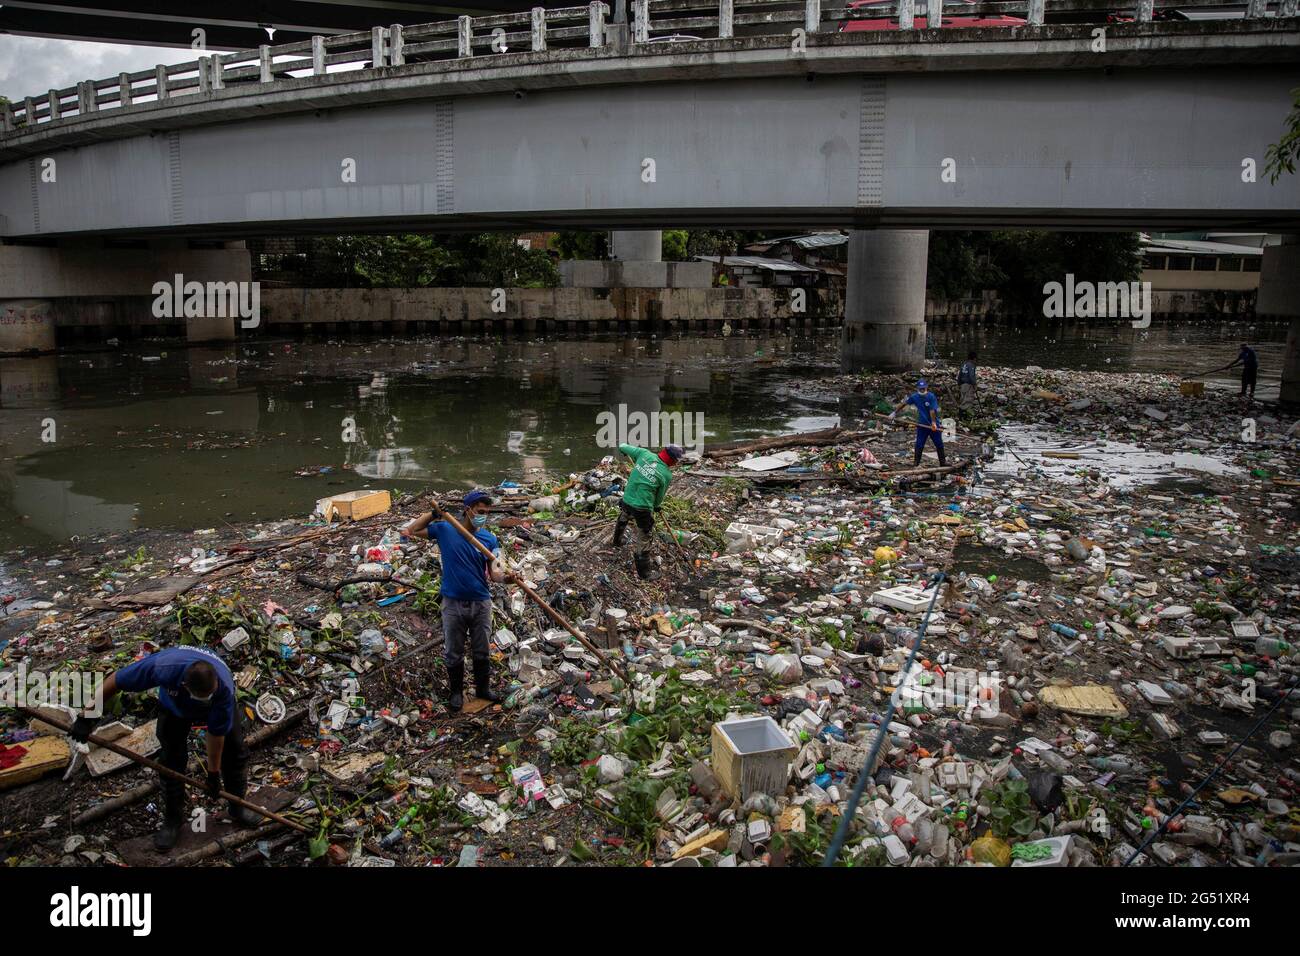 Members of the River Warriors gather washed-up trash from the heavily polluted San Juan River, a tributary of Pasig River, in Mandaluyong City, Philippines, June 21, 2021. The 'River Warriors' is a group of volunteers founded over a decade ago whose sole purpose was to pick up garbage in and around Manila's Pasig River. Picture taken June 21, 2021. REUTERS/Eloisa Lopez Stock Photo